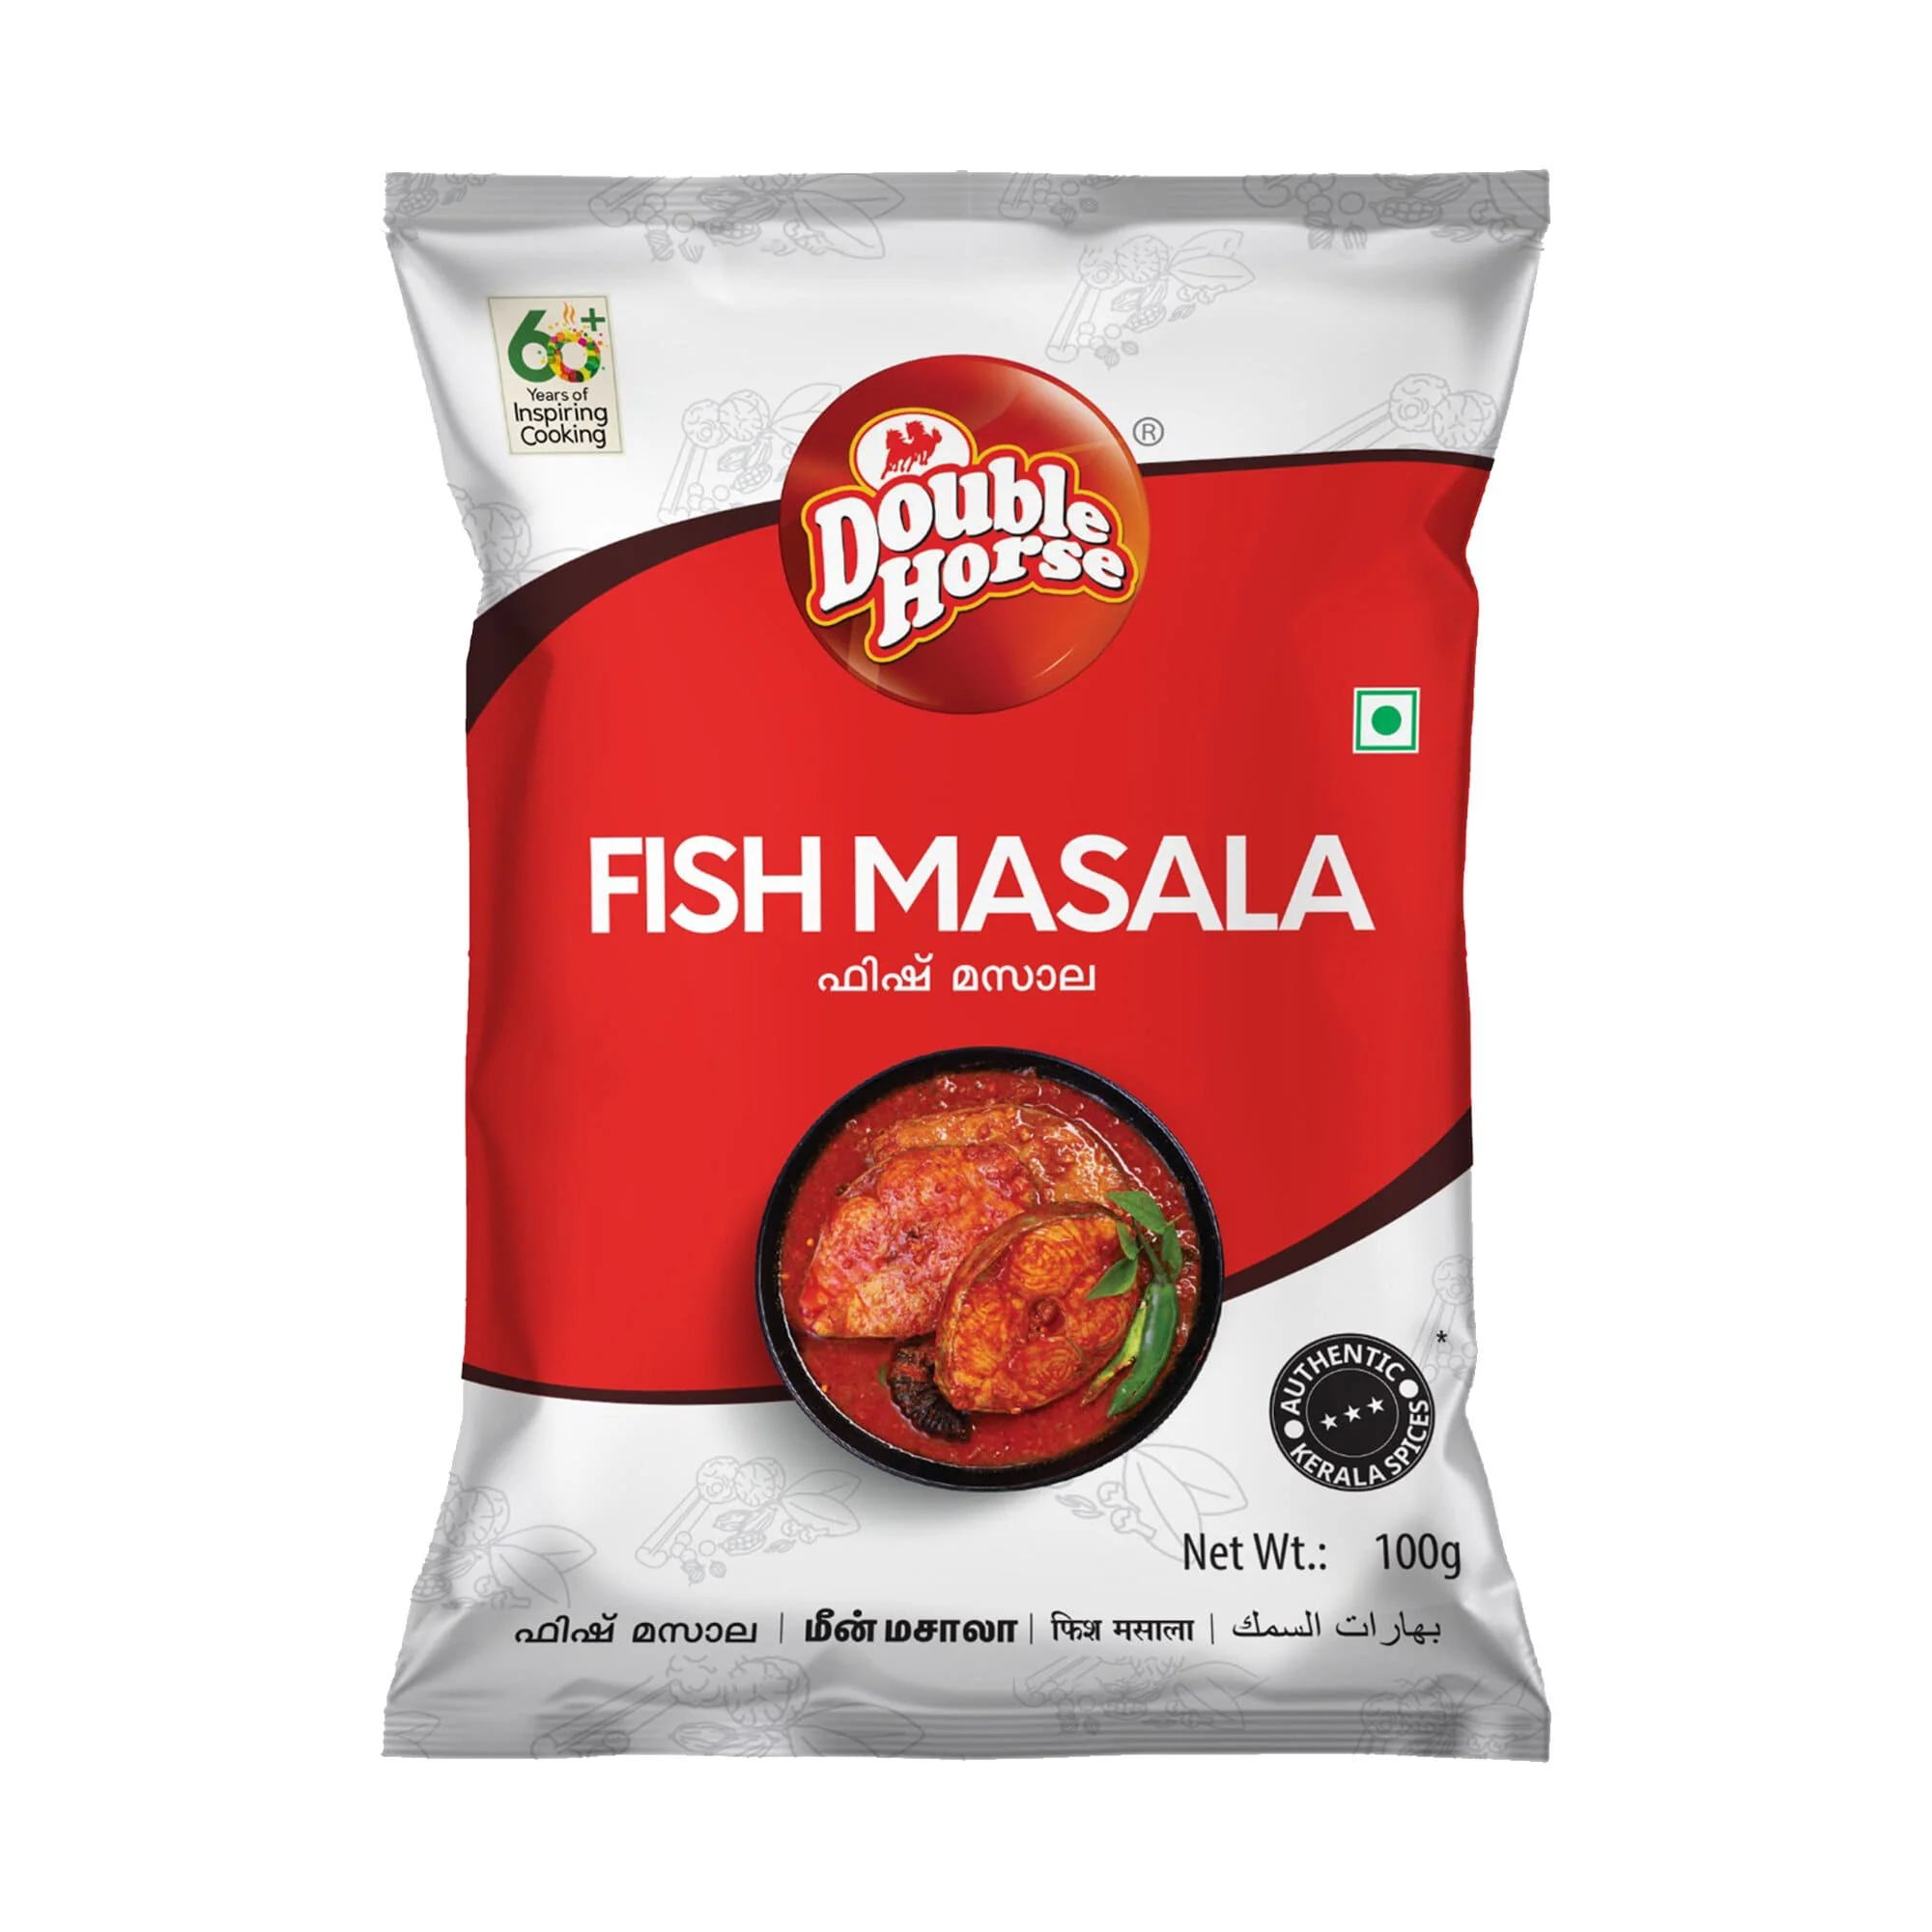 Double Horse Fish Masala 100g | Spice Mix for Fish